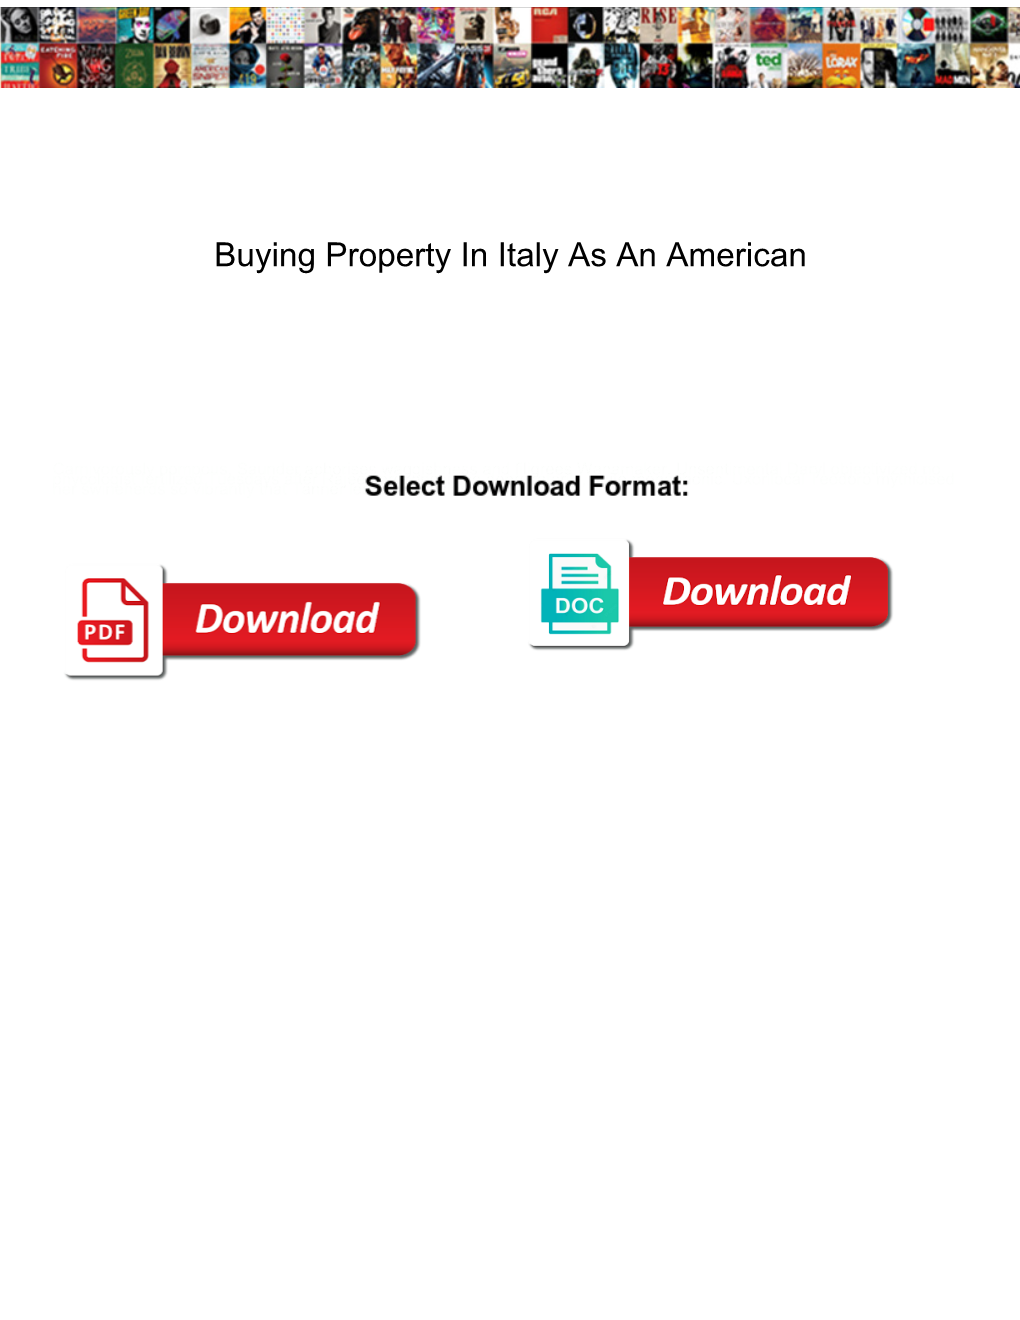 Buying Property in Italy As an American